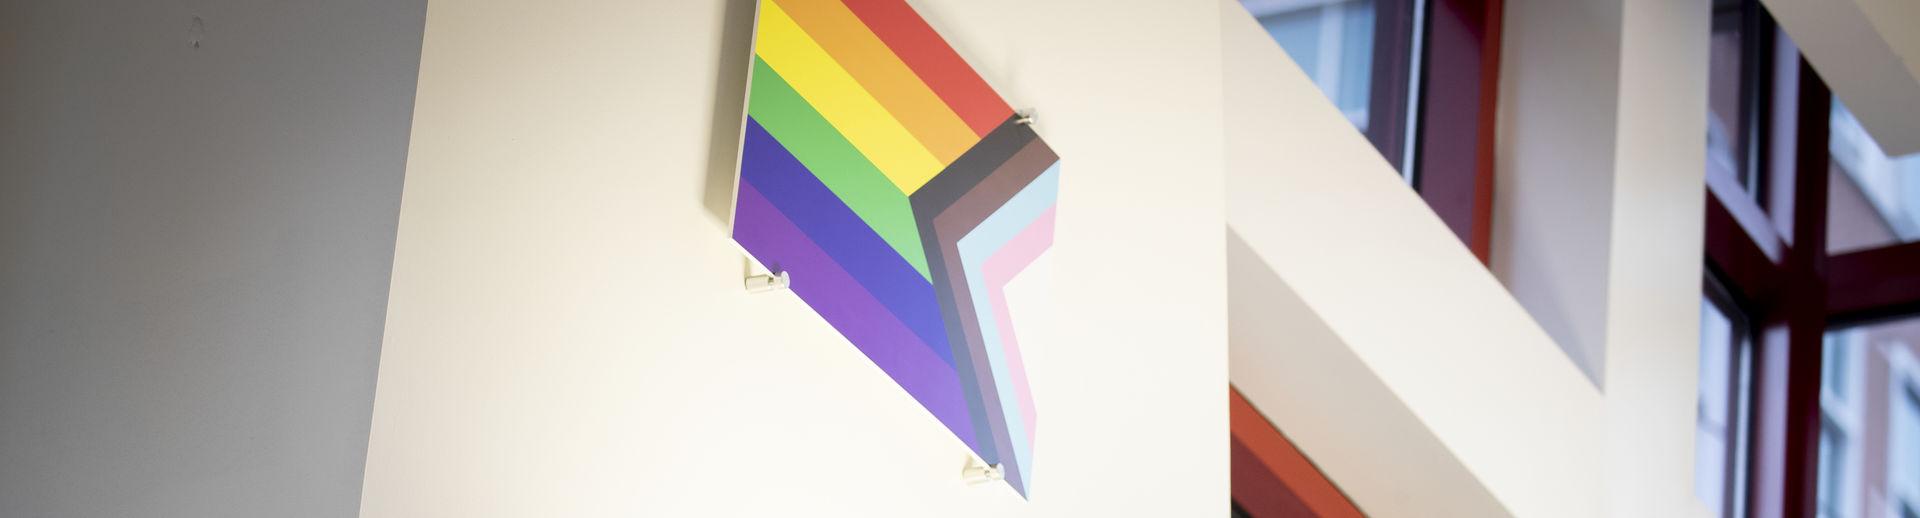 The pride flag hangs in the student center of Temple University.